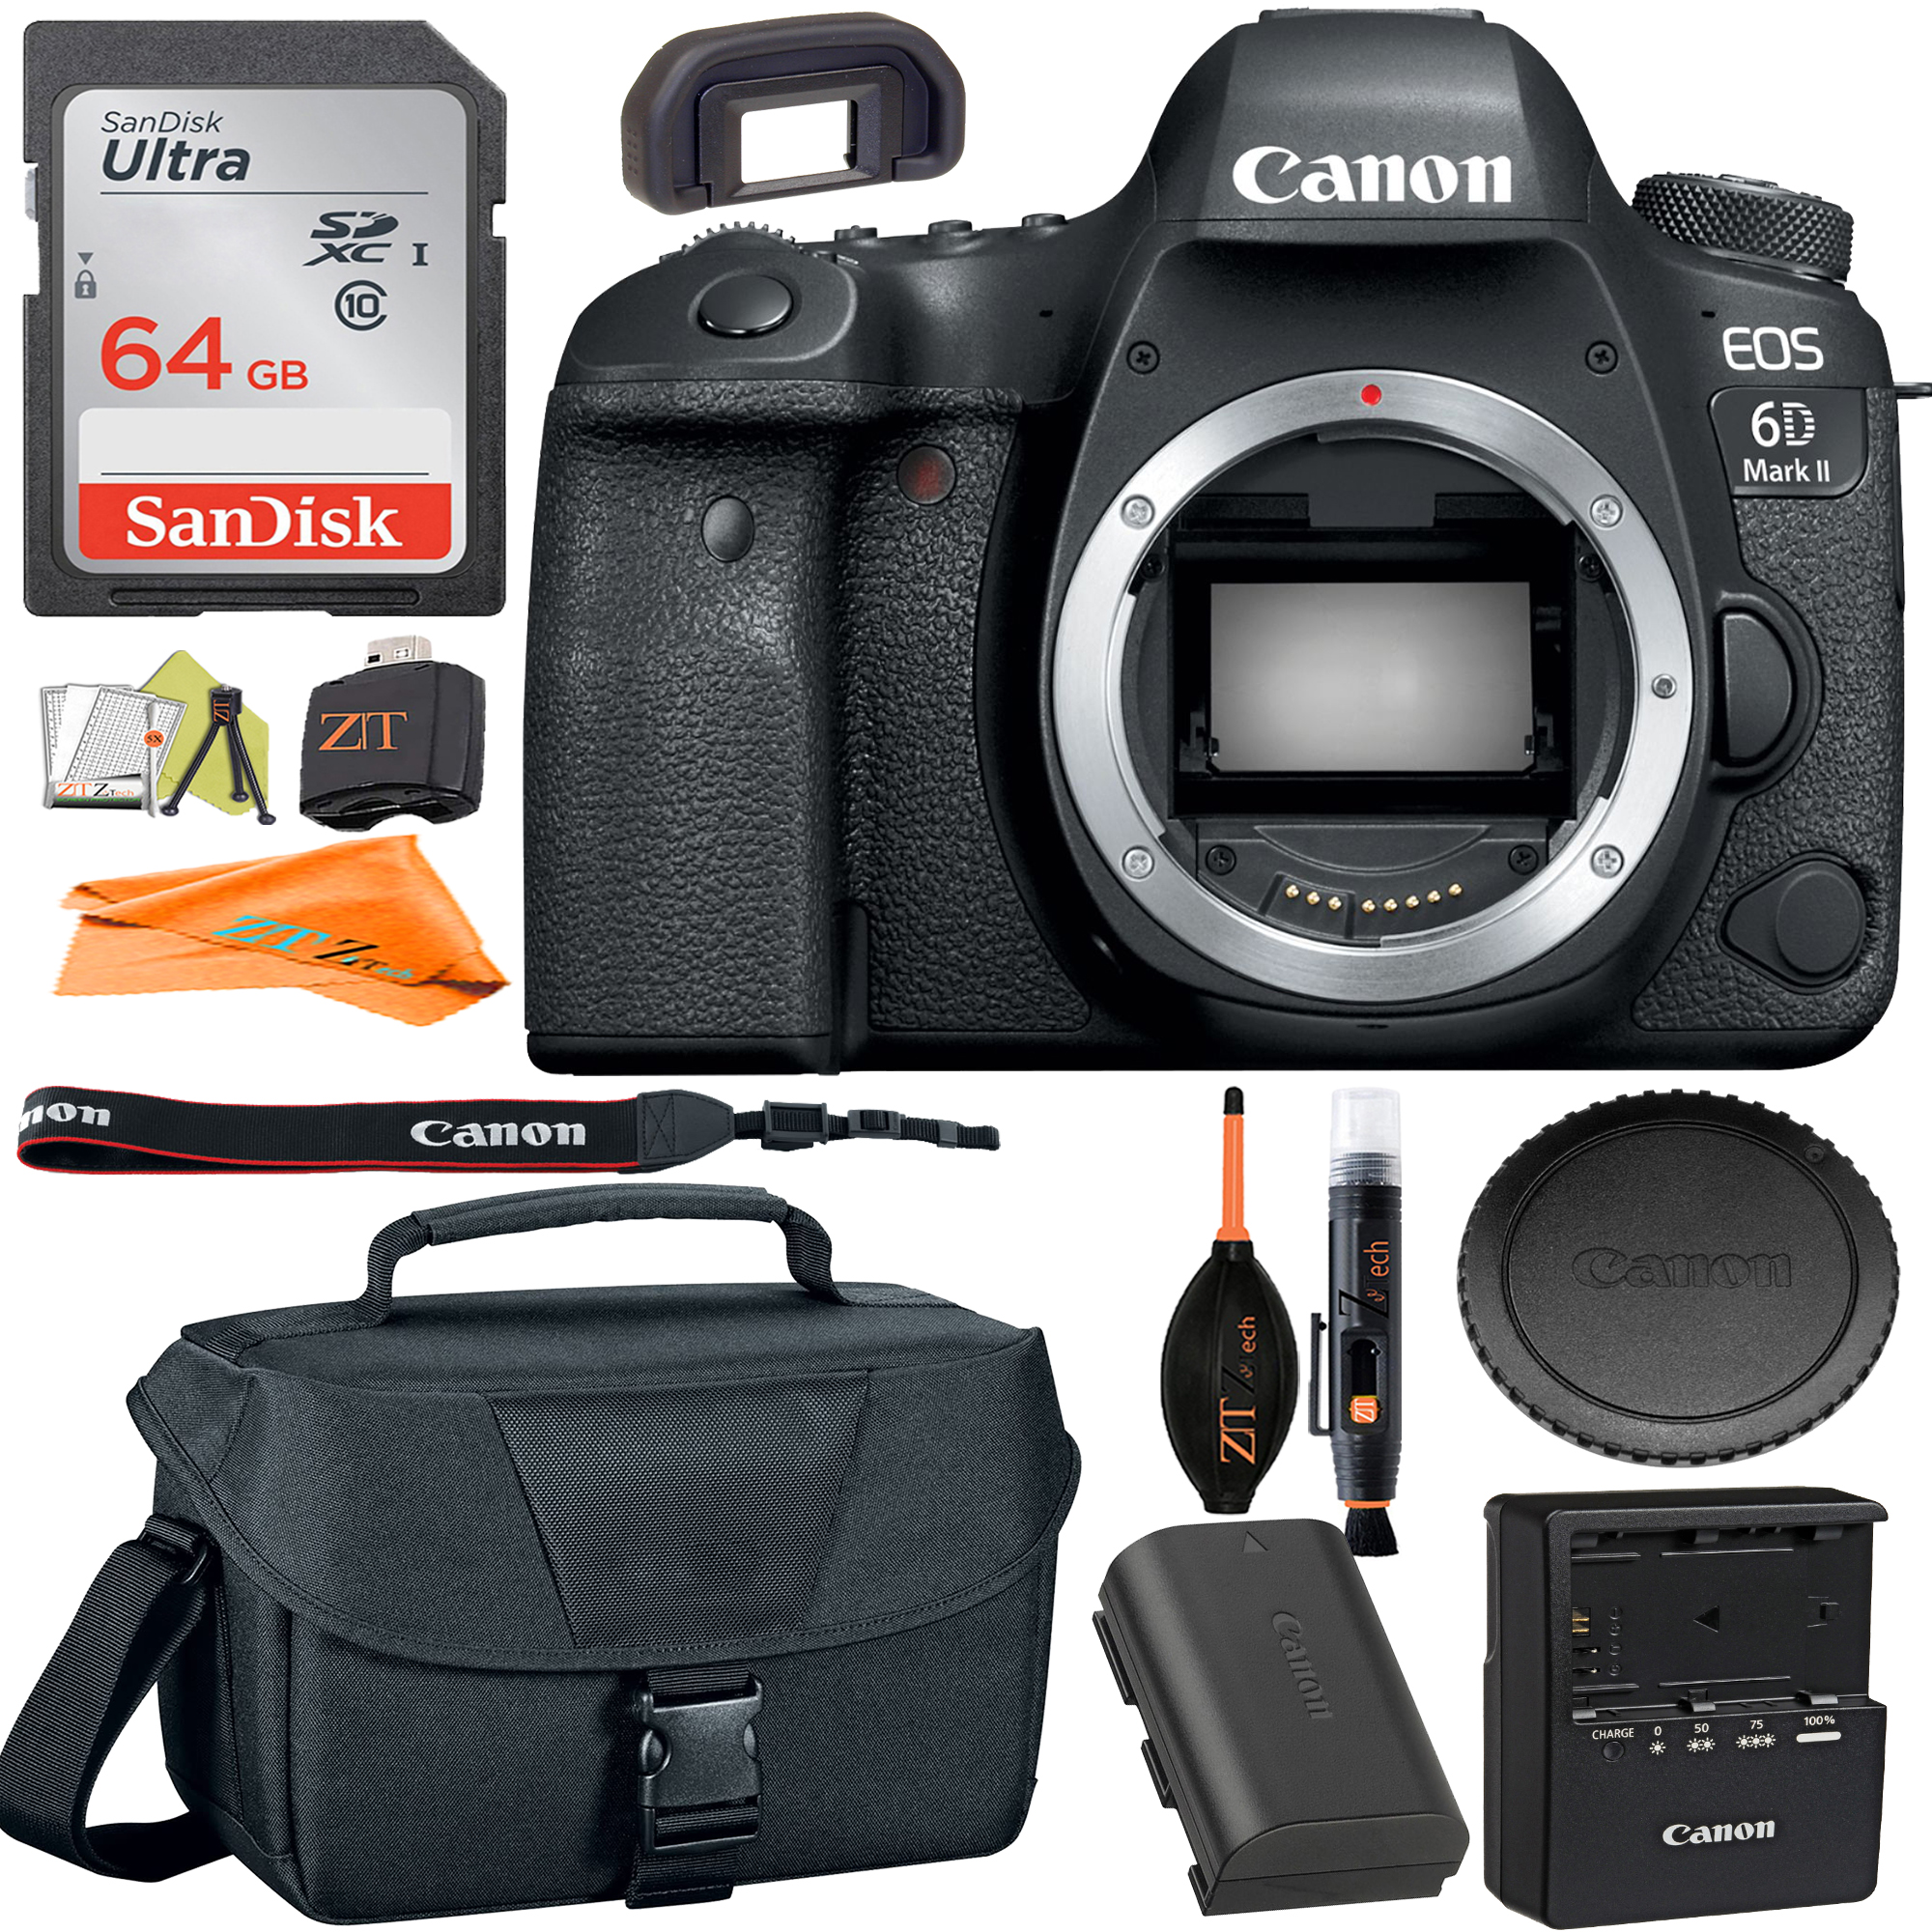 Canon EOS 6D Mark II DSLR Camera (Body Only) with SanDisk 64GB Card + Case + ZeeTech Accessory Bundle